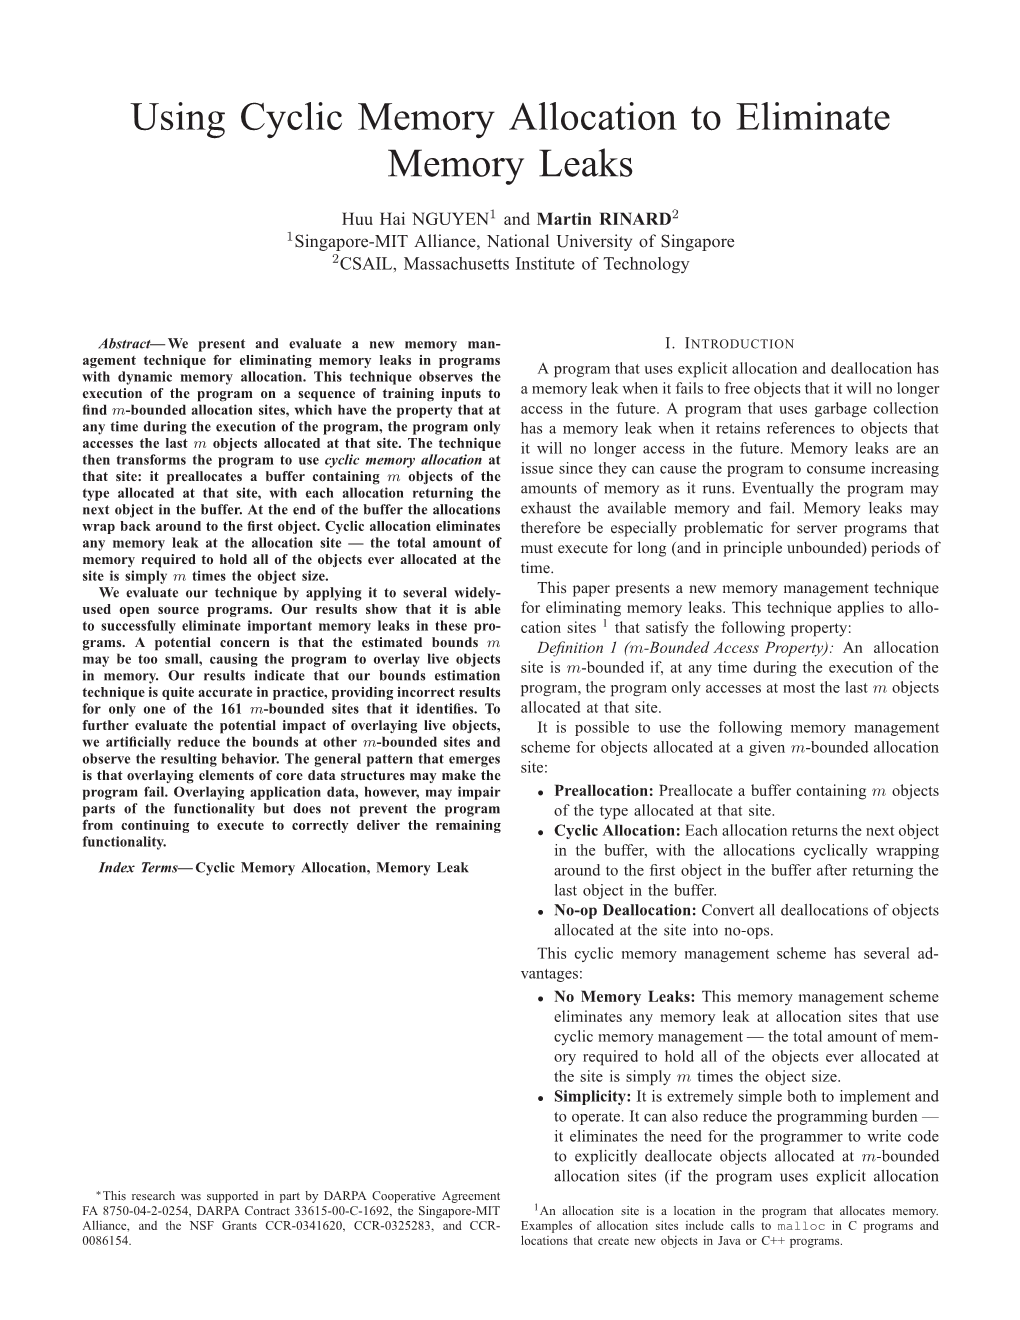 Using Cyclic Memory Allocation to Eliminate Memory Leaks